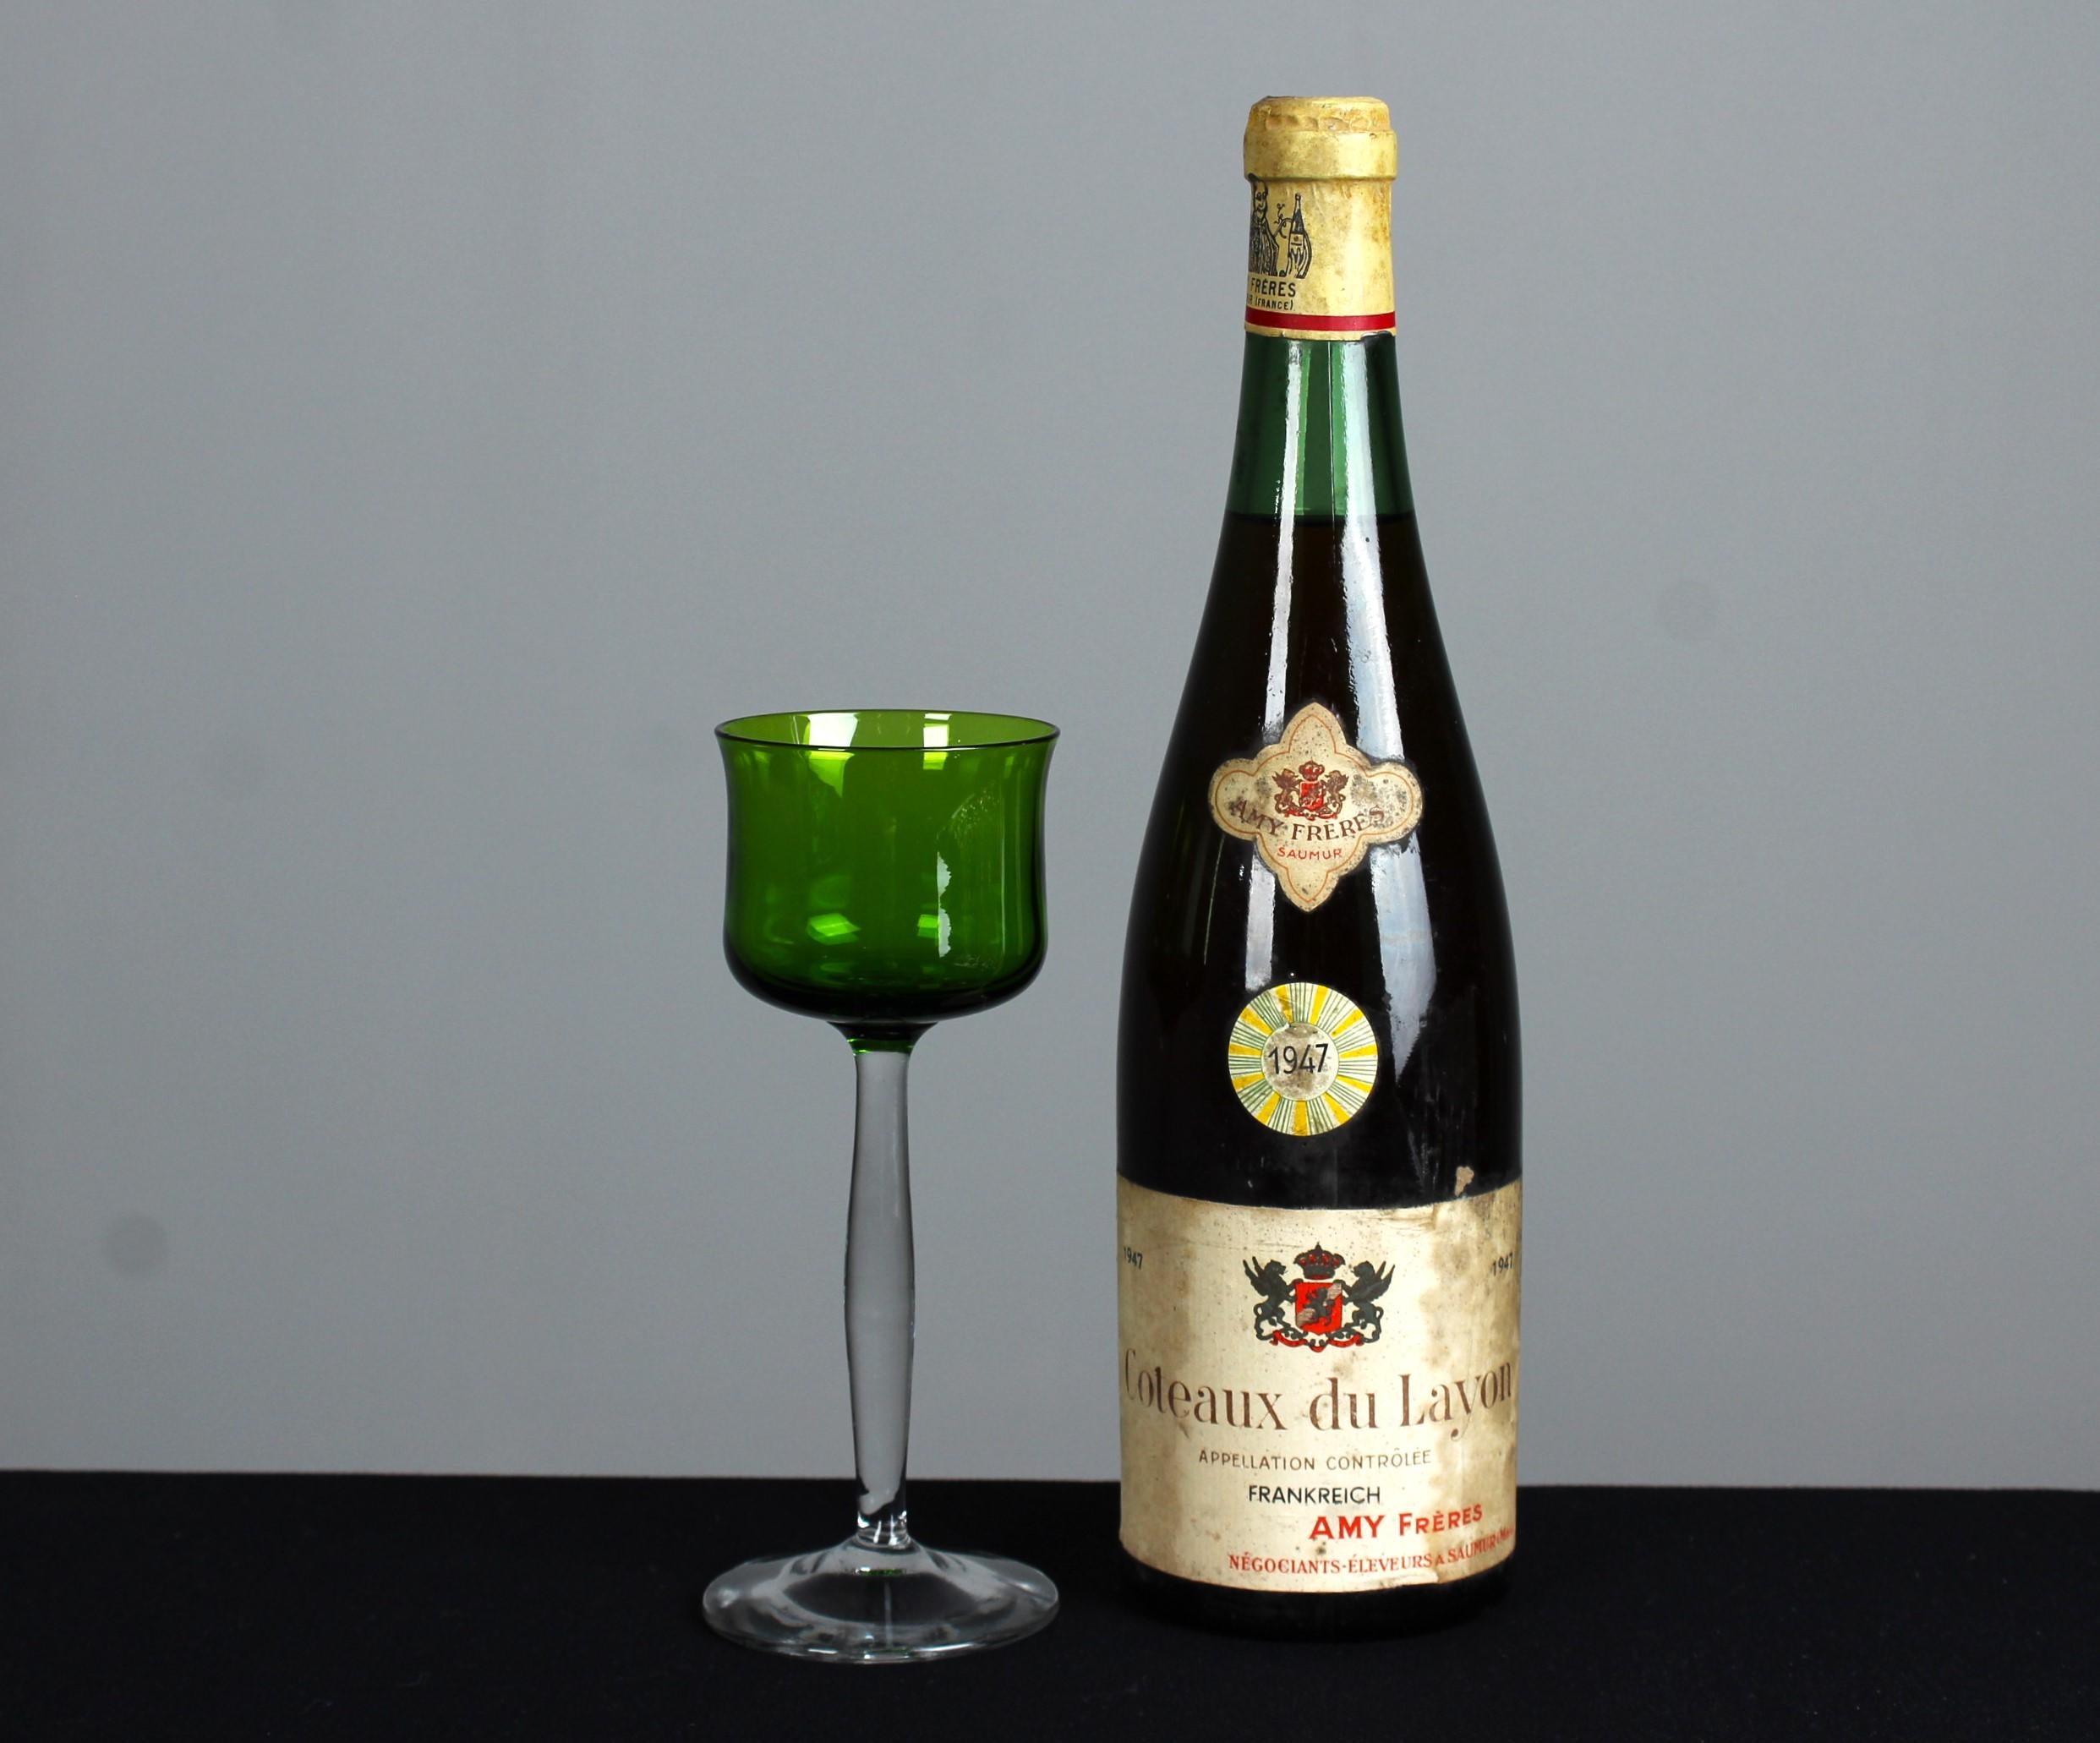 A beautiful antique, green coloured wine glass.

At the turn of the 20th century, the French culture of fine dining and socialising flourished, leading to the emergence of a symbol of French epicurean culture: the aperitif glass. These glasses not